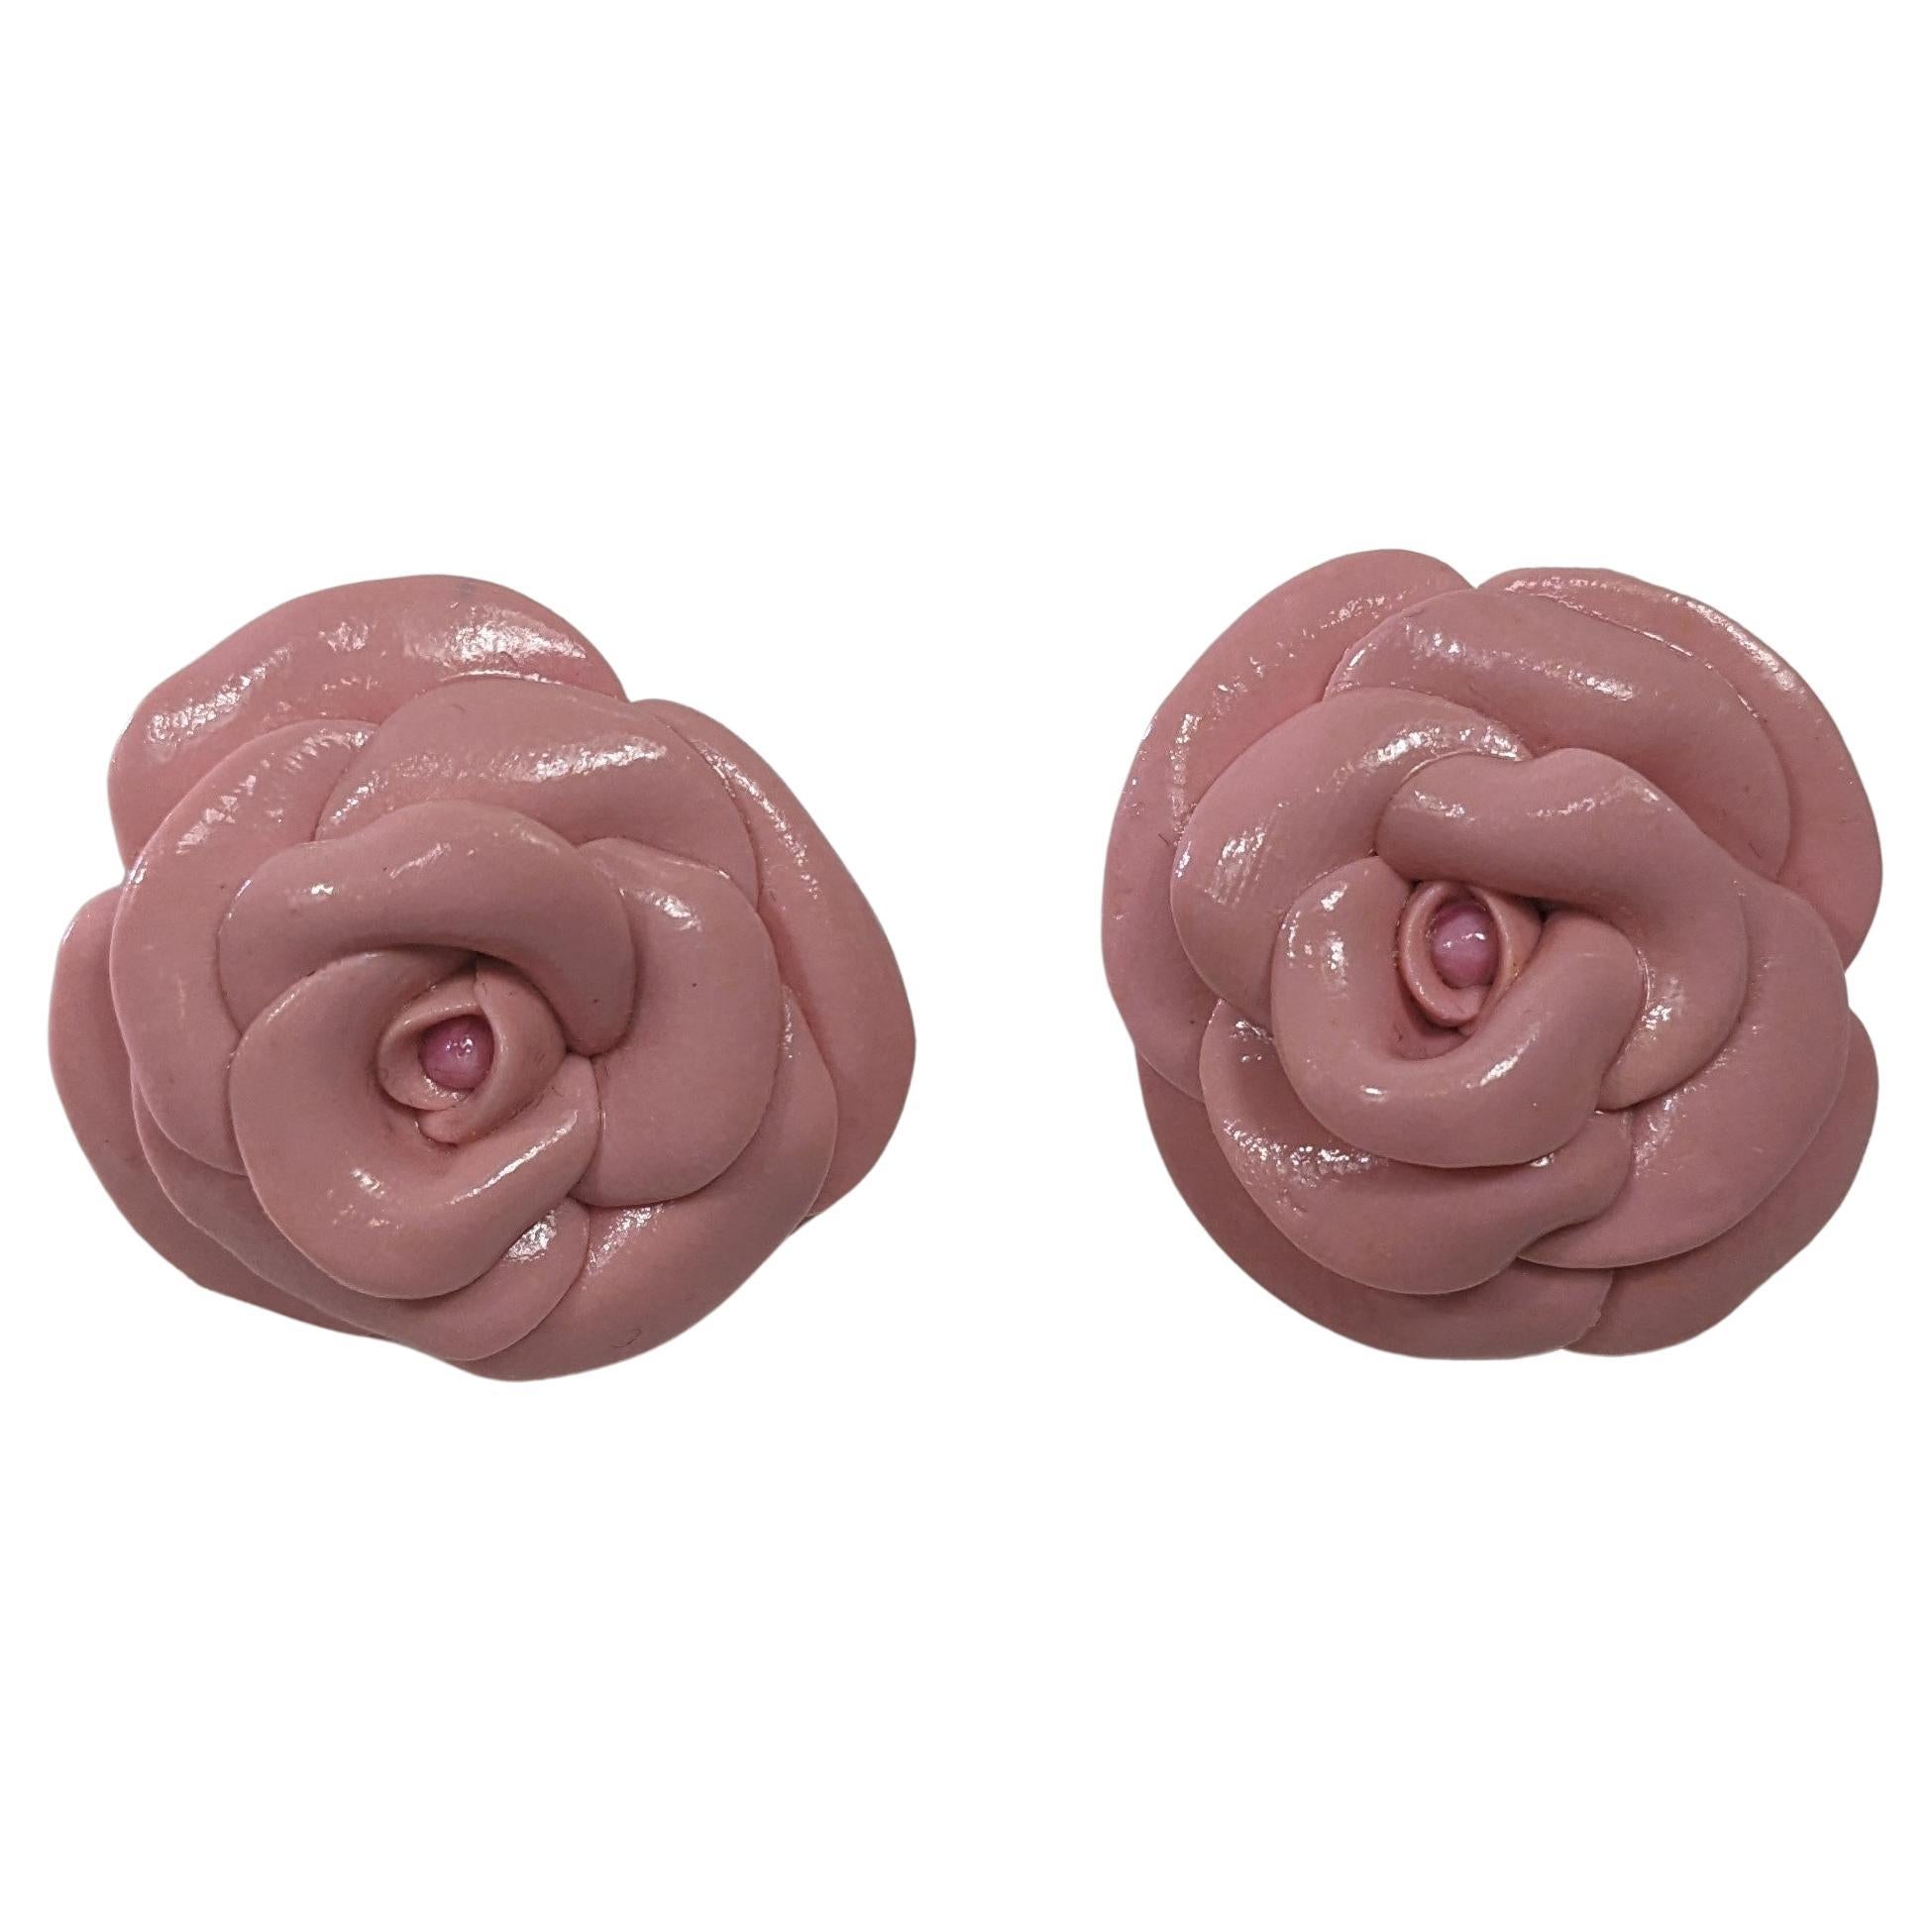  Rose Camelia Polymer  Earrings with golplated silver closure